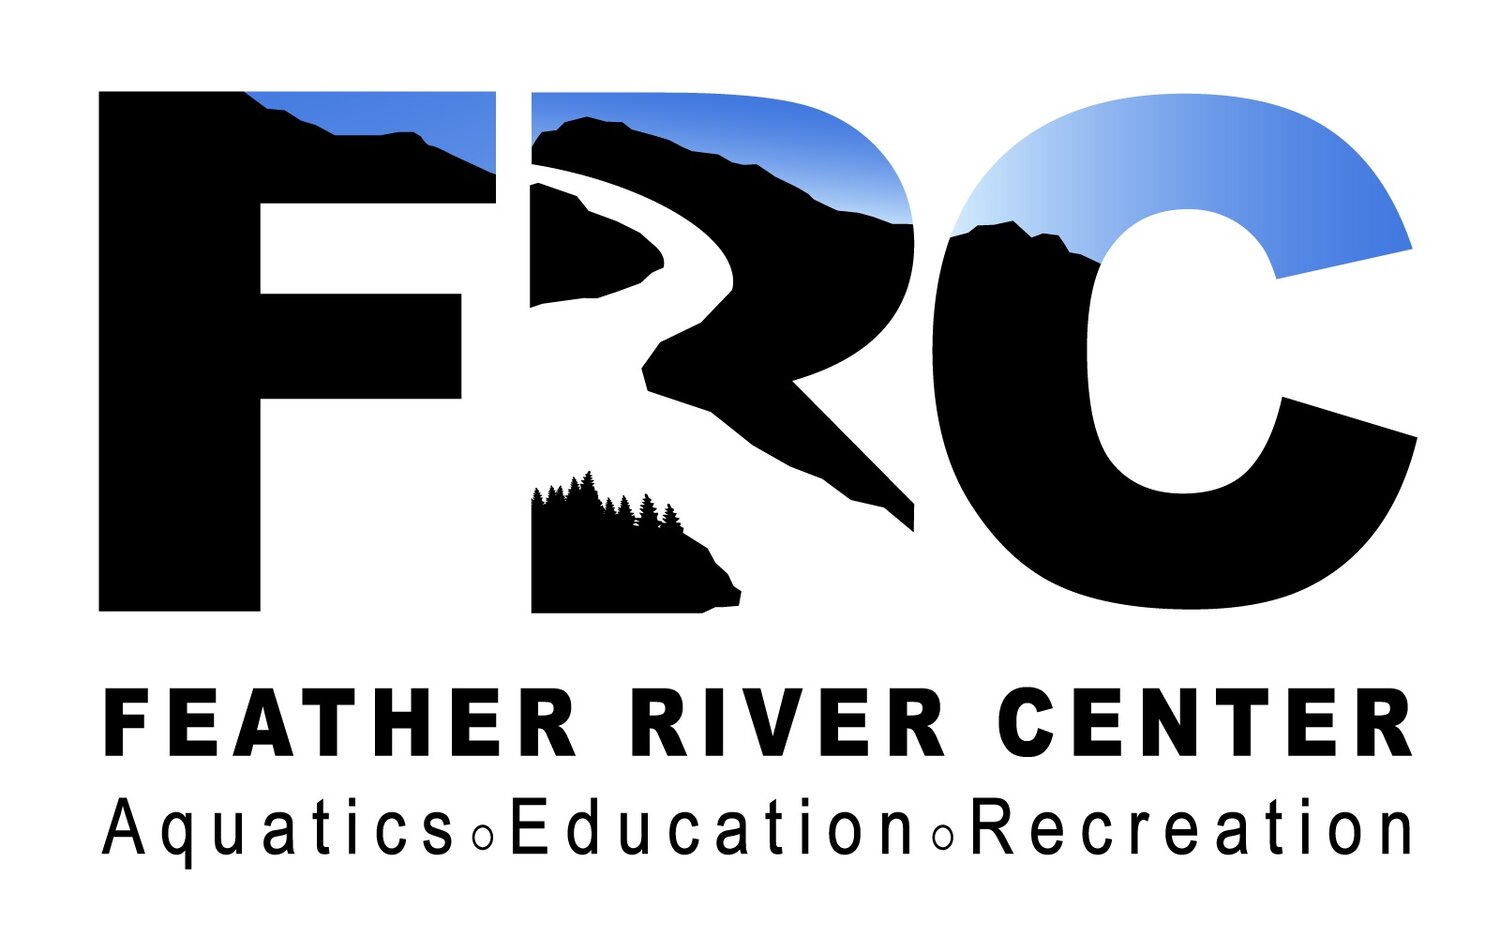 Feather River Center